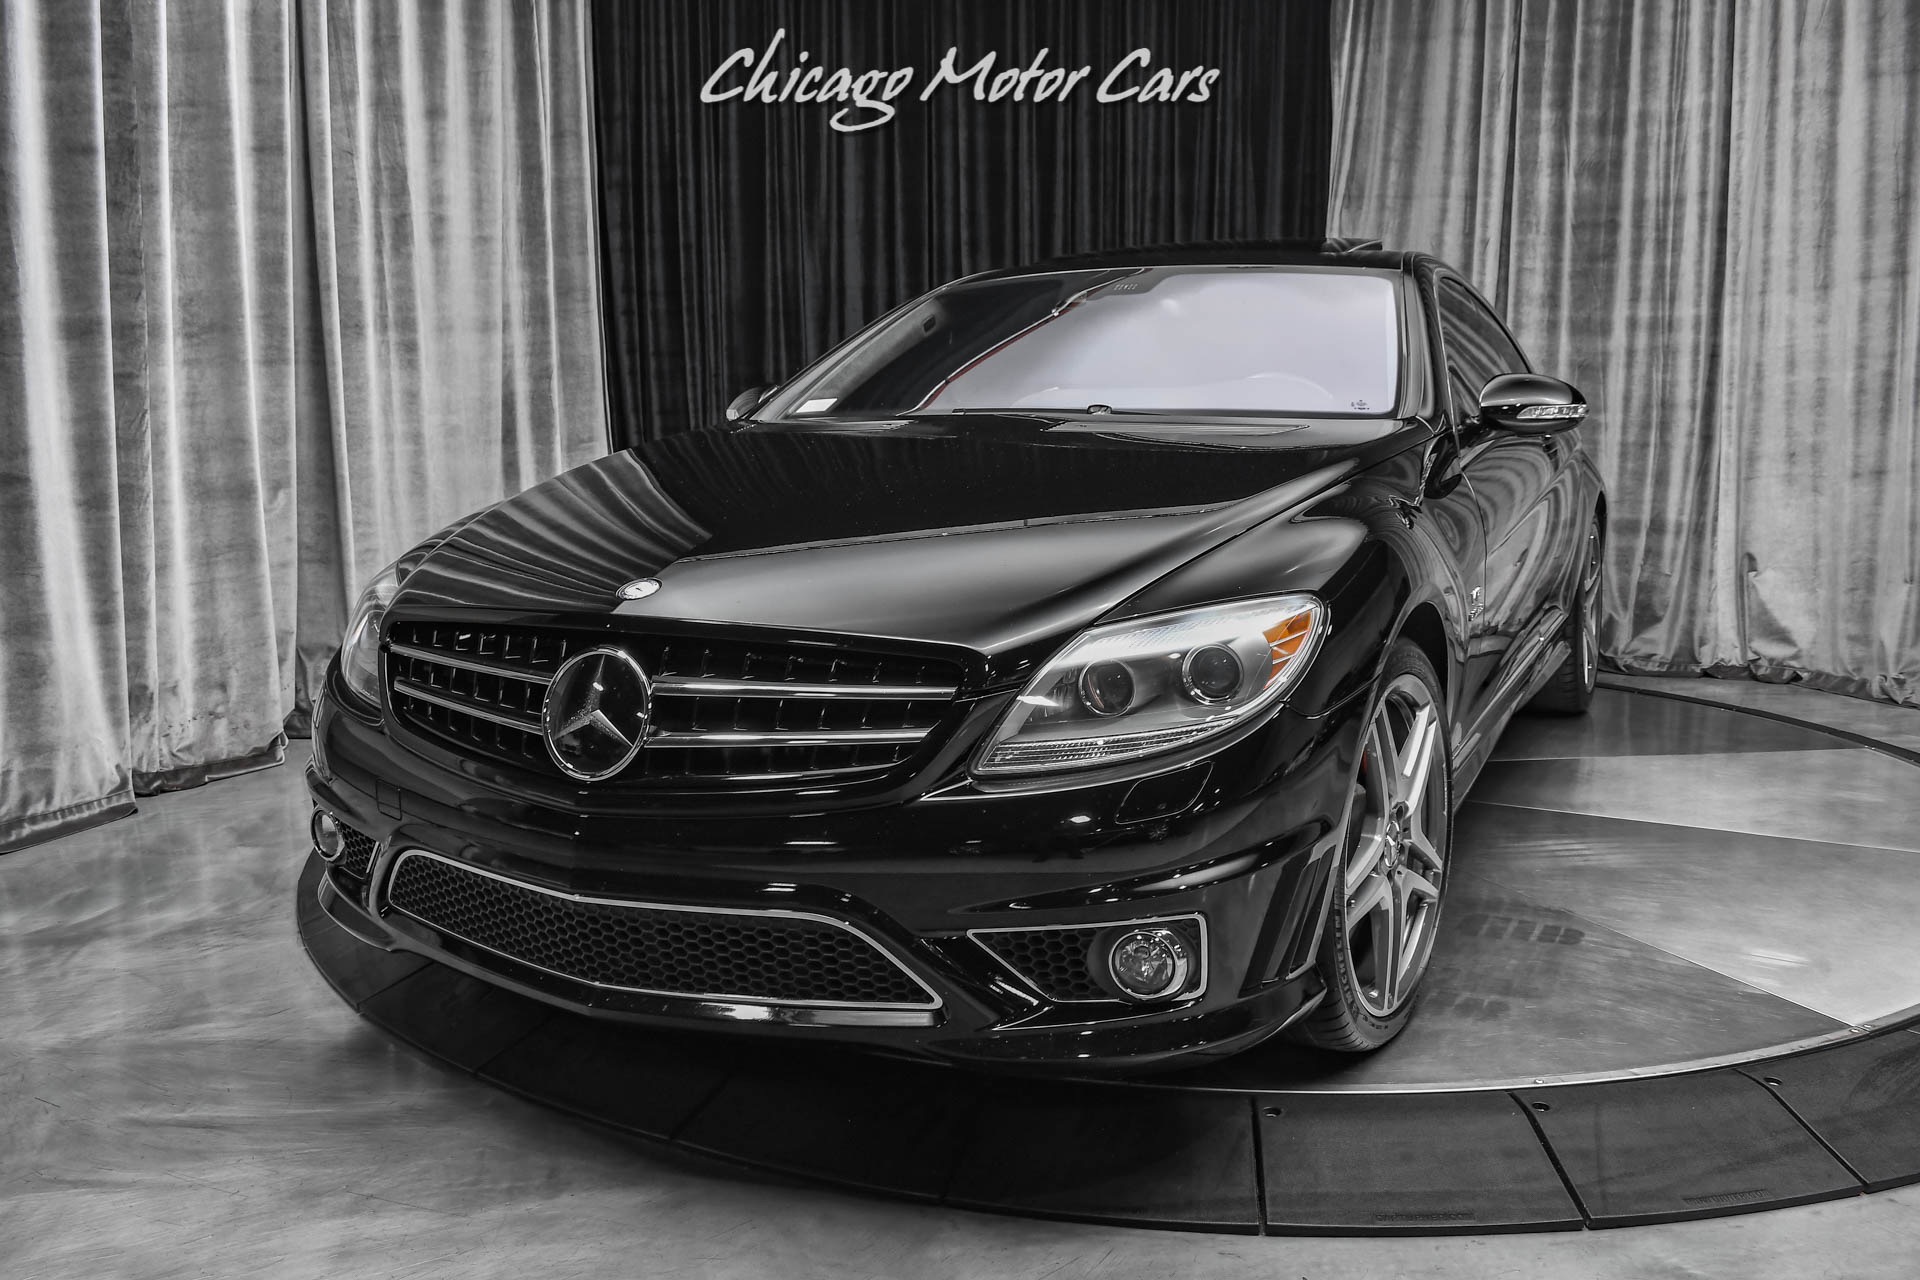 Used-2008-Mercedes-Benz-CL65-AMG-Coupe-600-HP-Twin-Turbo-V12-Integration-Pack-Massage-Seats